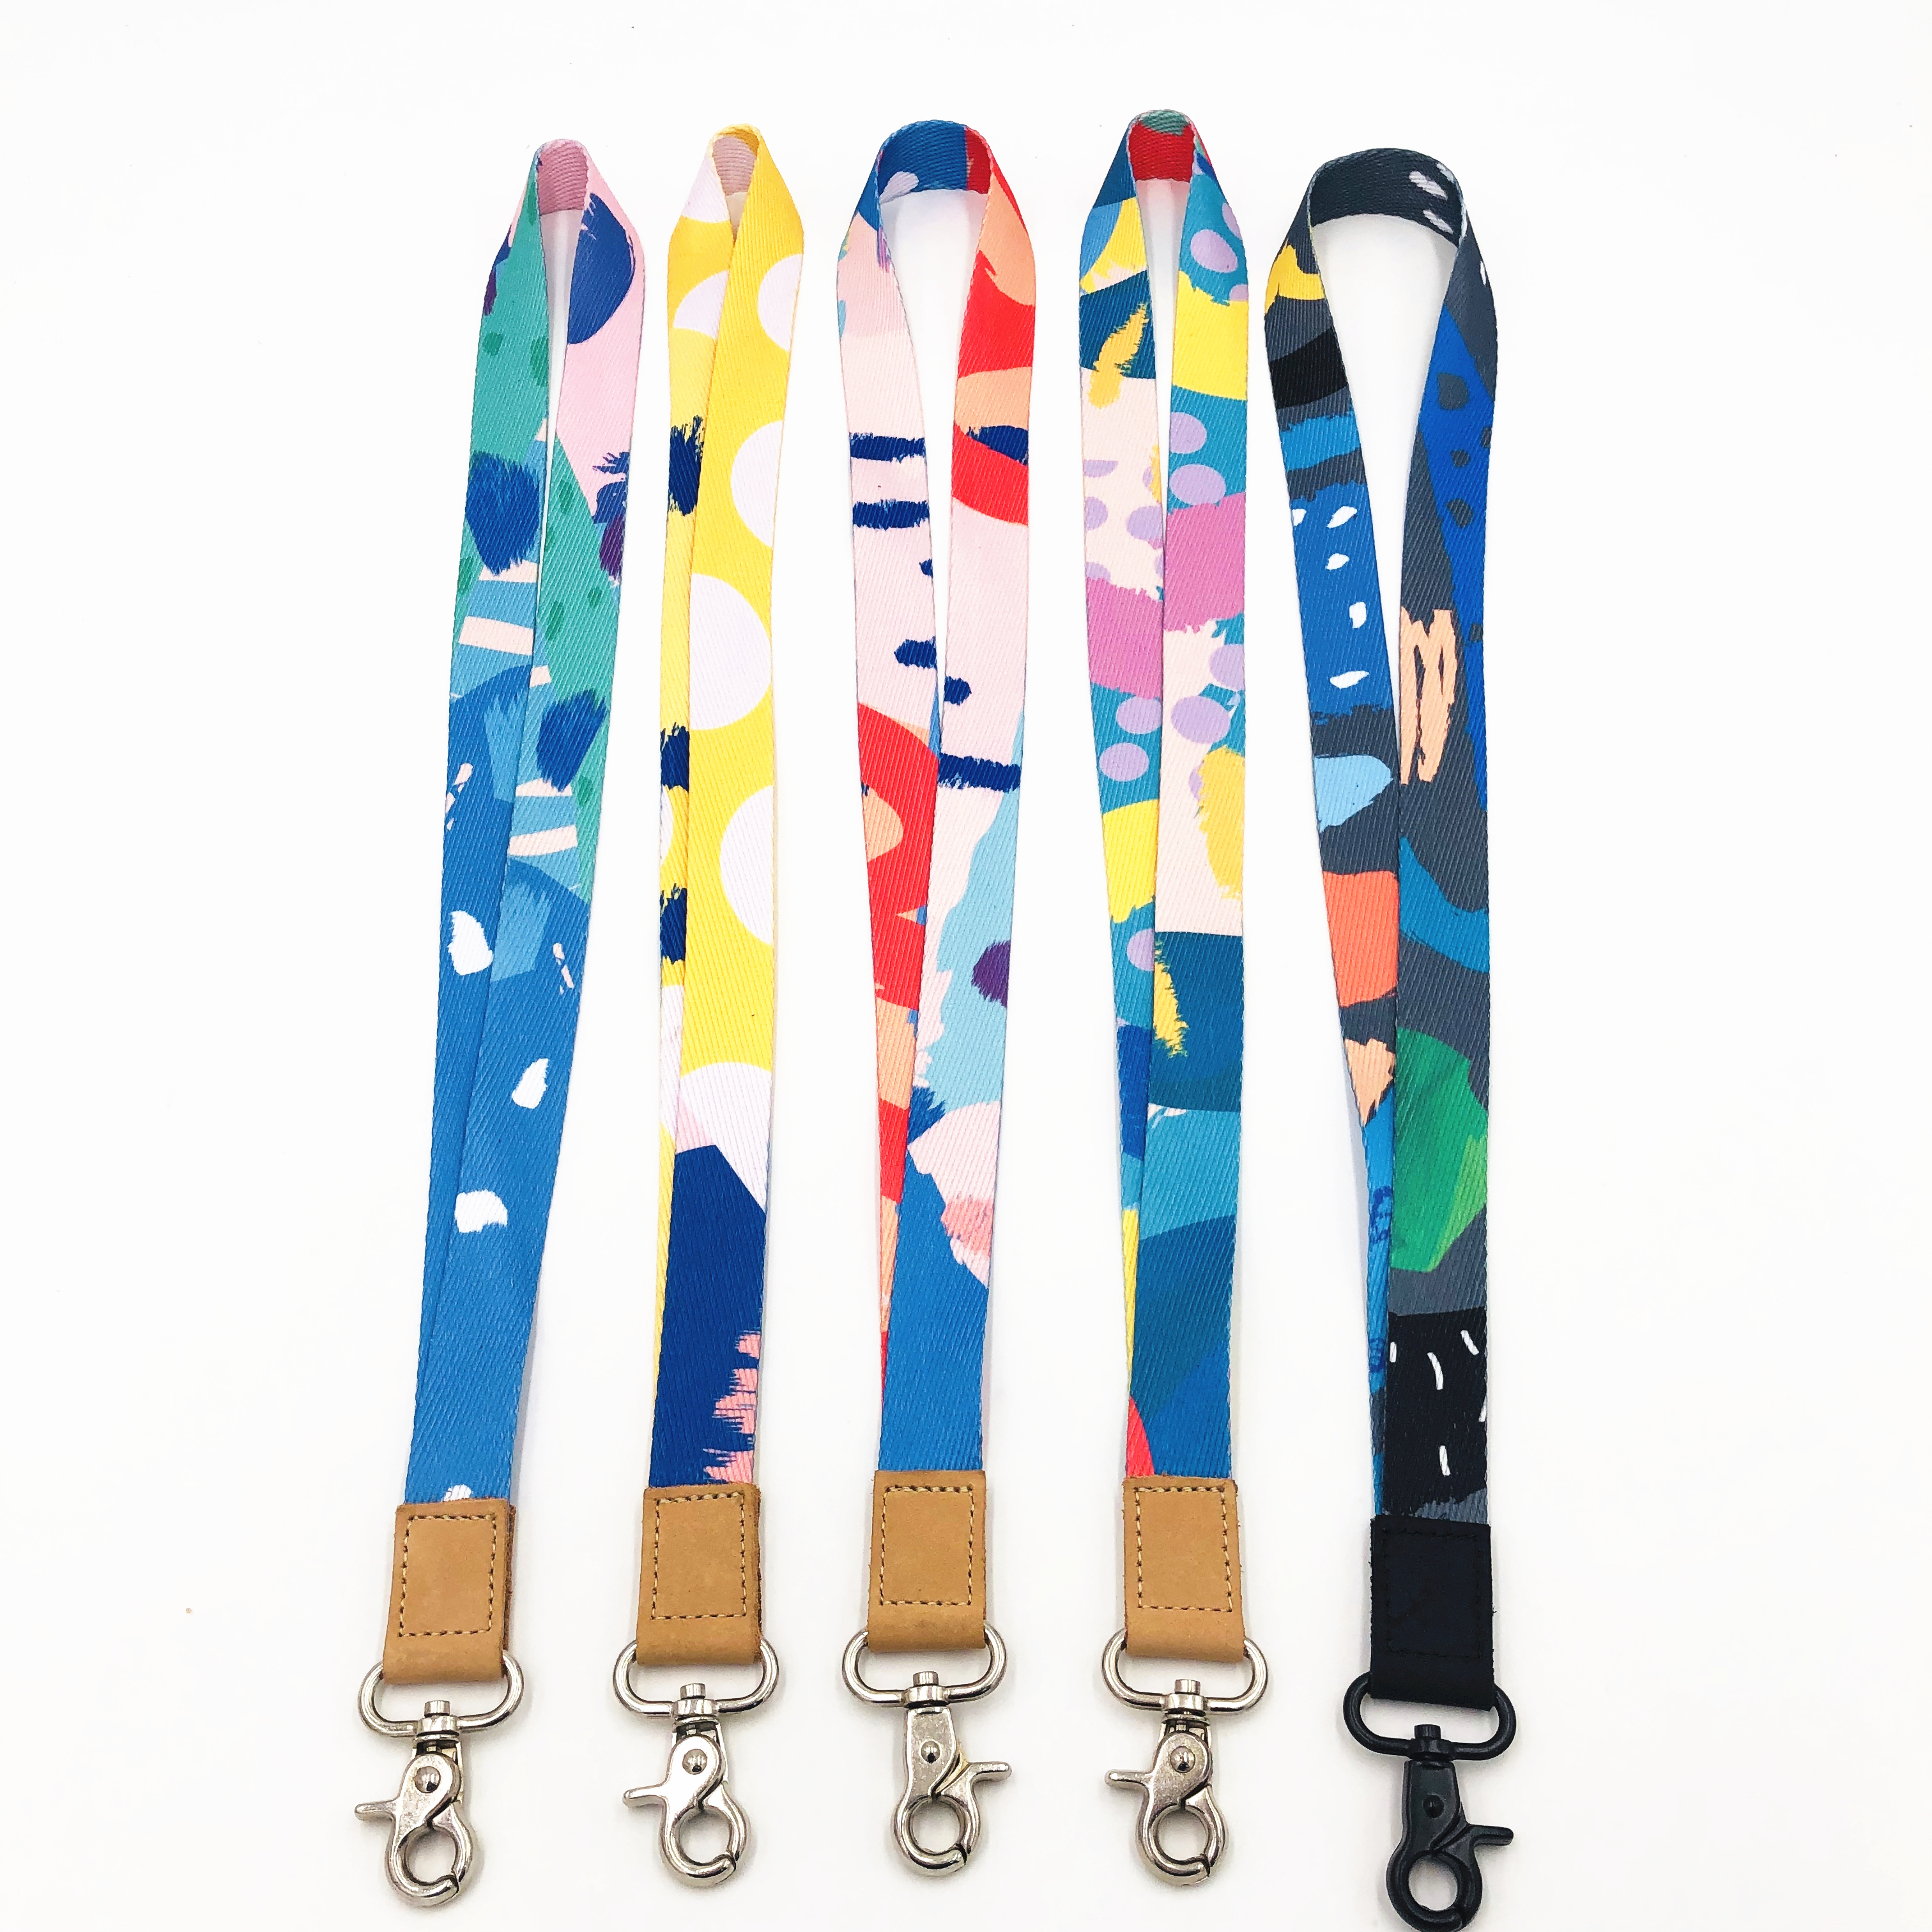 China Cheap price Sublimation Printing Lanyard – Premium Quality with Metal Clasp and Genuine Leather Neck Strap Lanyard for Card Holder – Bison